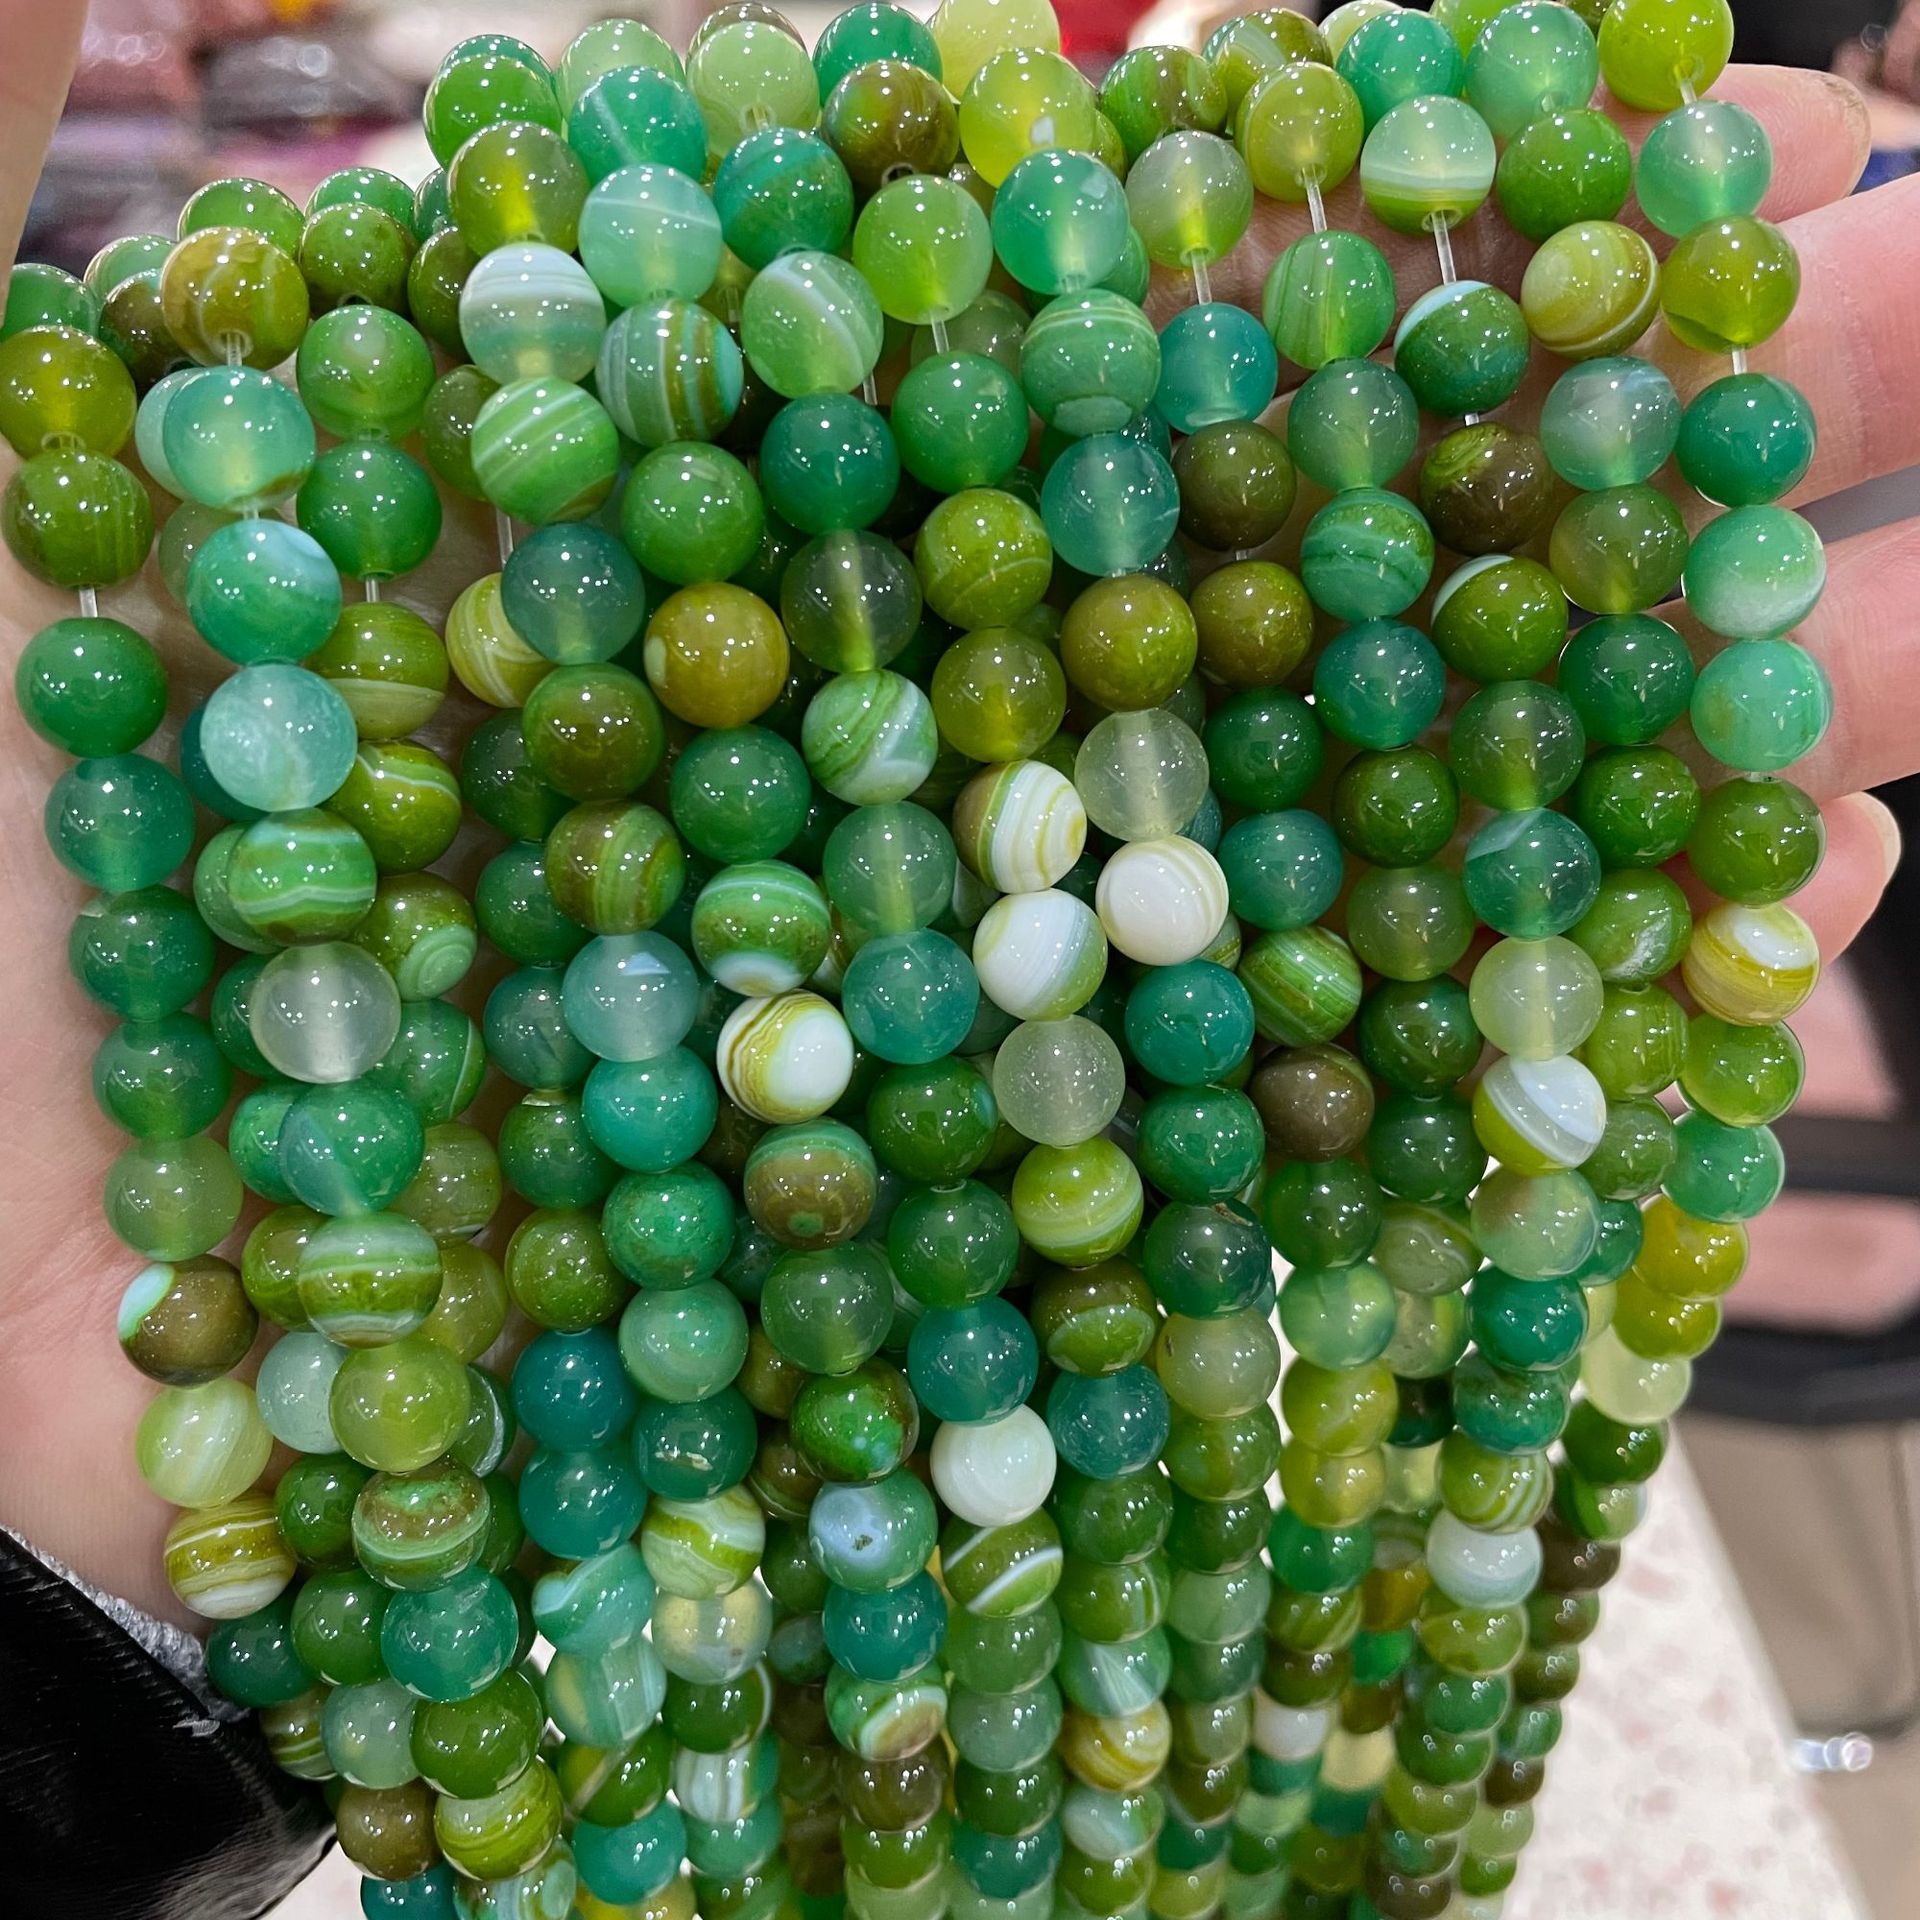 Apple green silk agate 6mm (about 60 pieces)